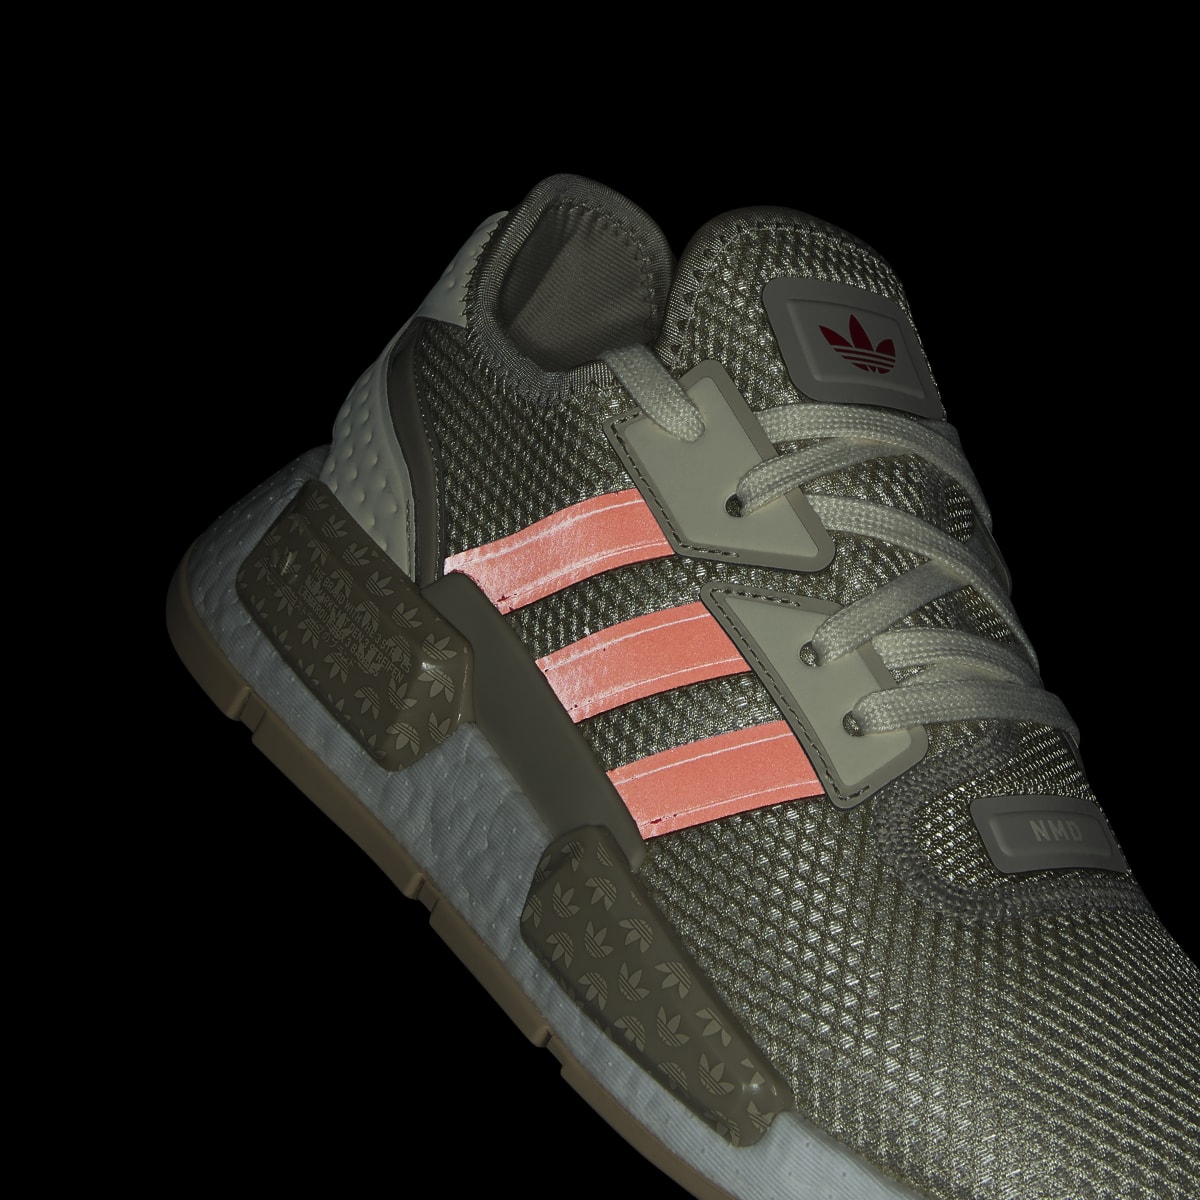 Adidas NMD_G1 Shoes. 10